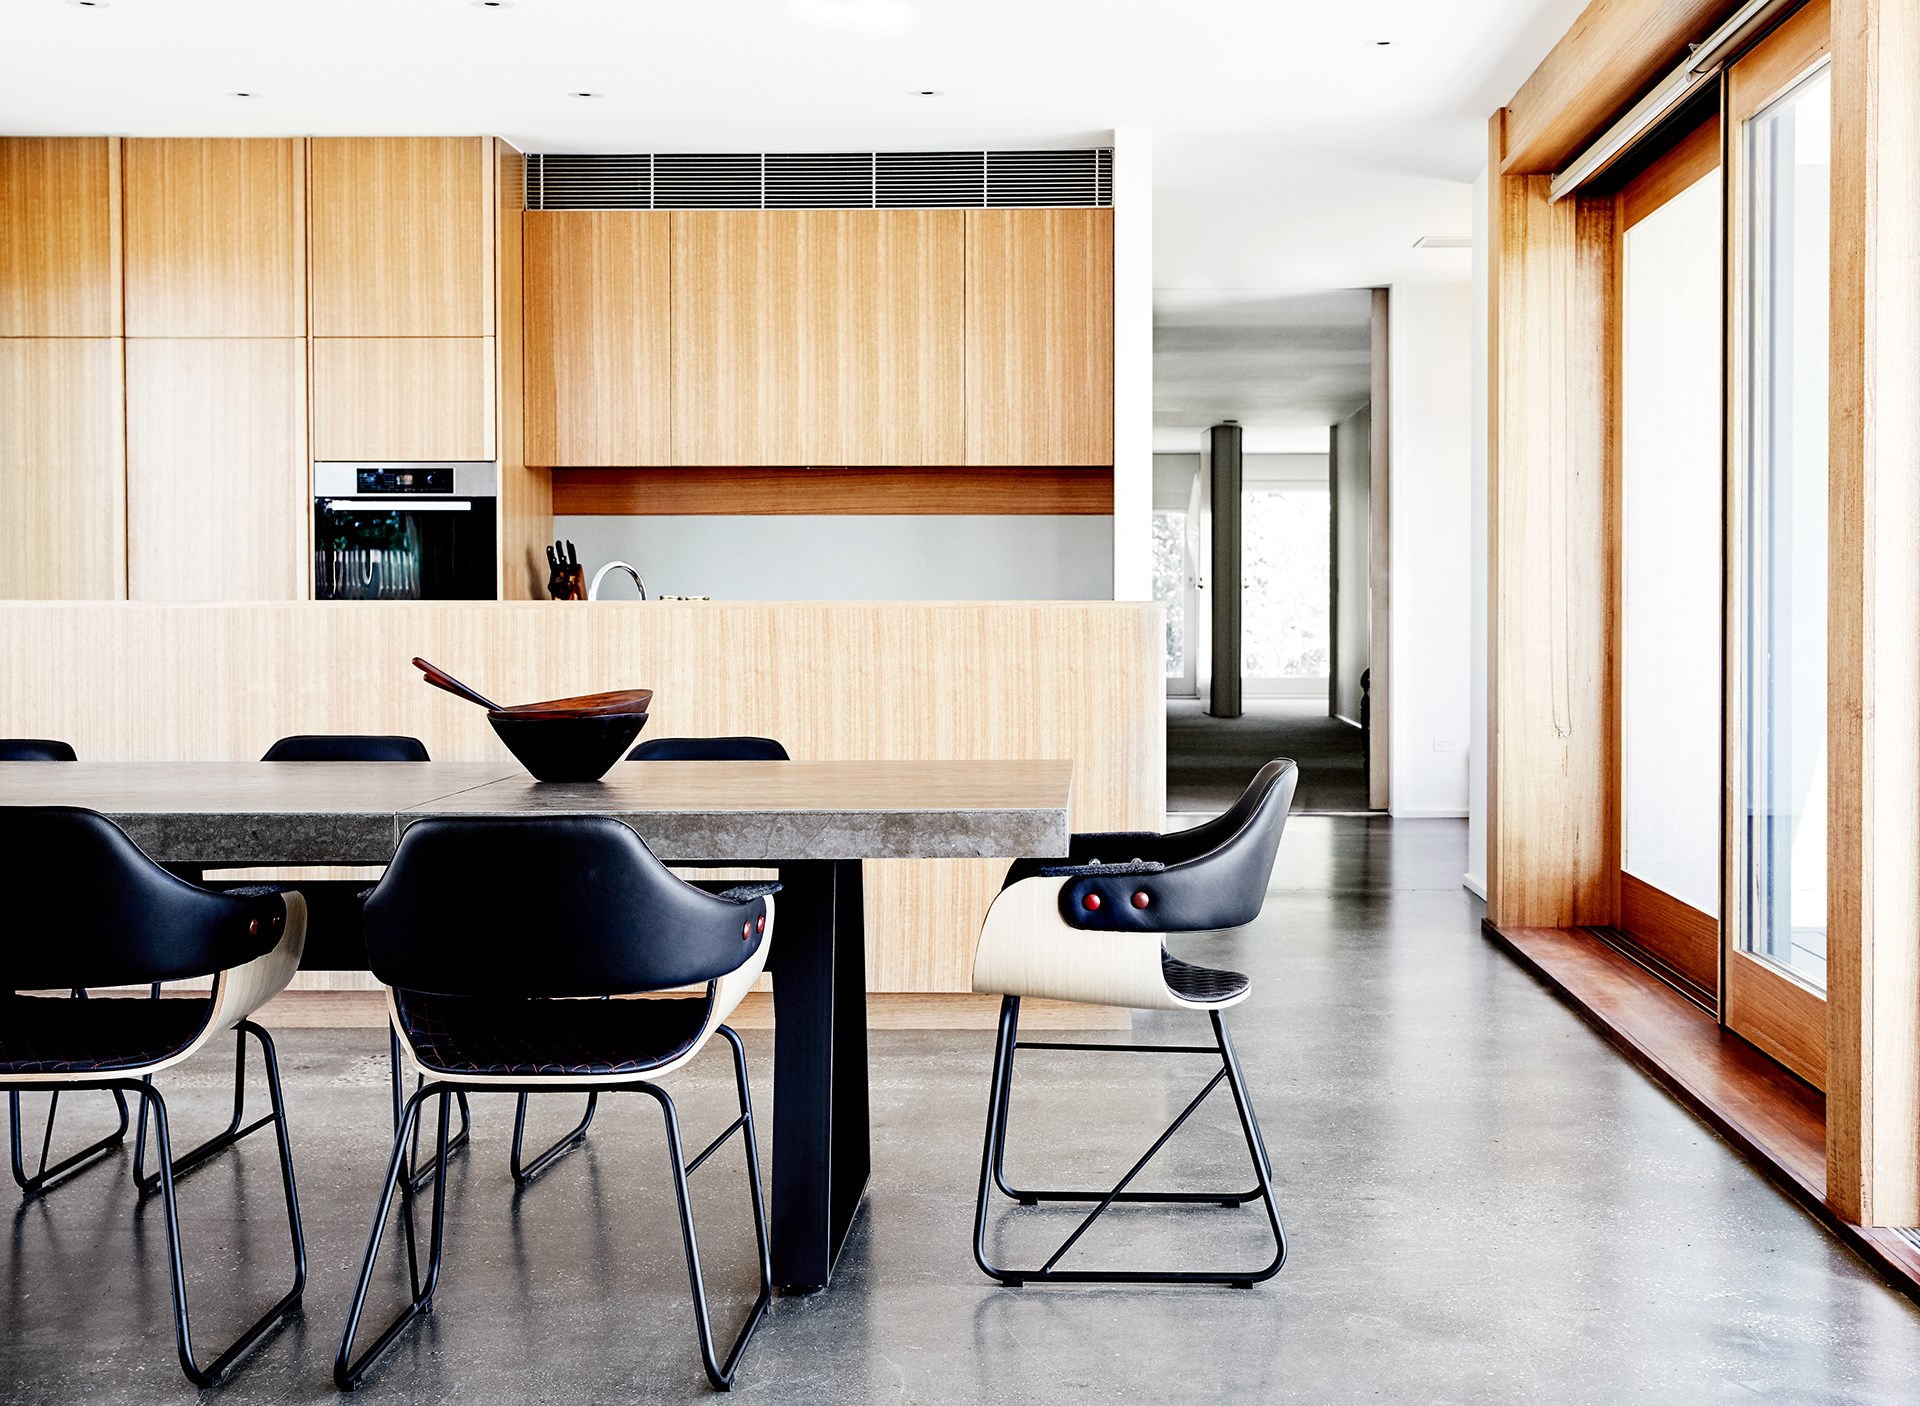 A concrete-topped table echoes the raw materials used throughout the house.